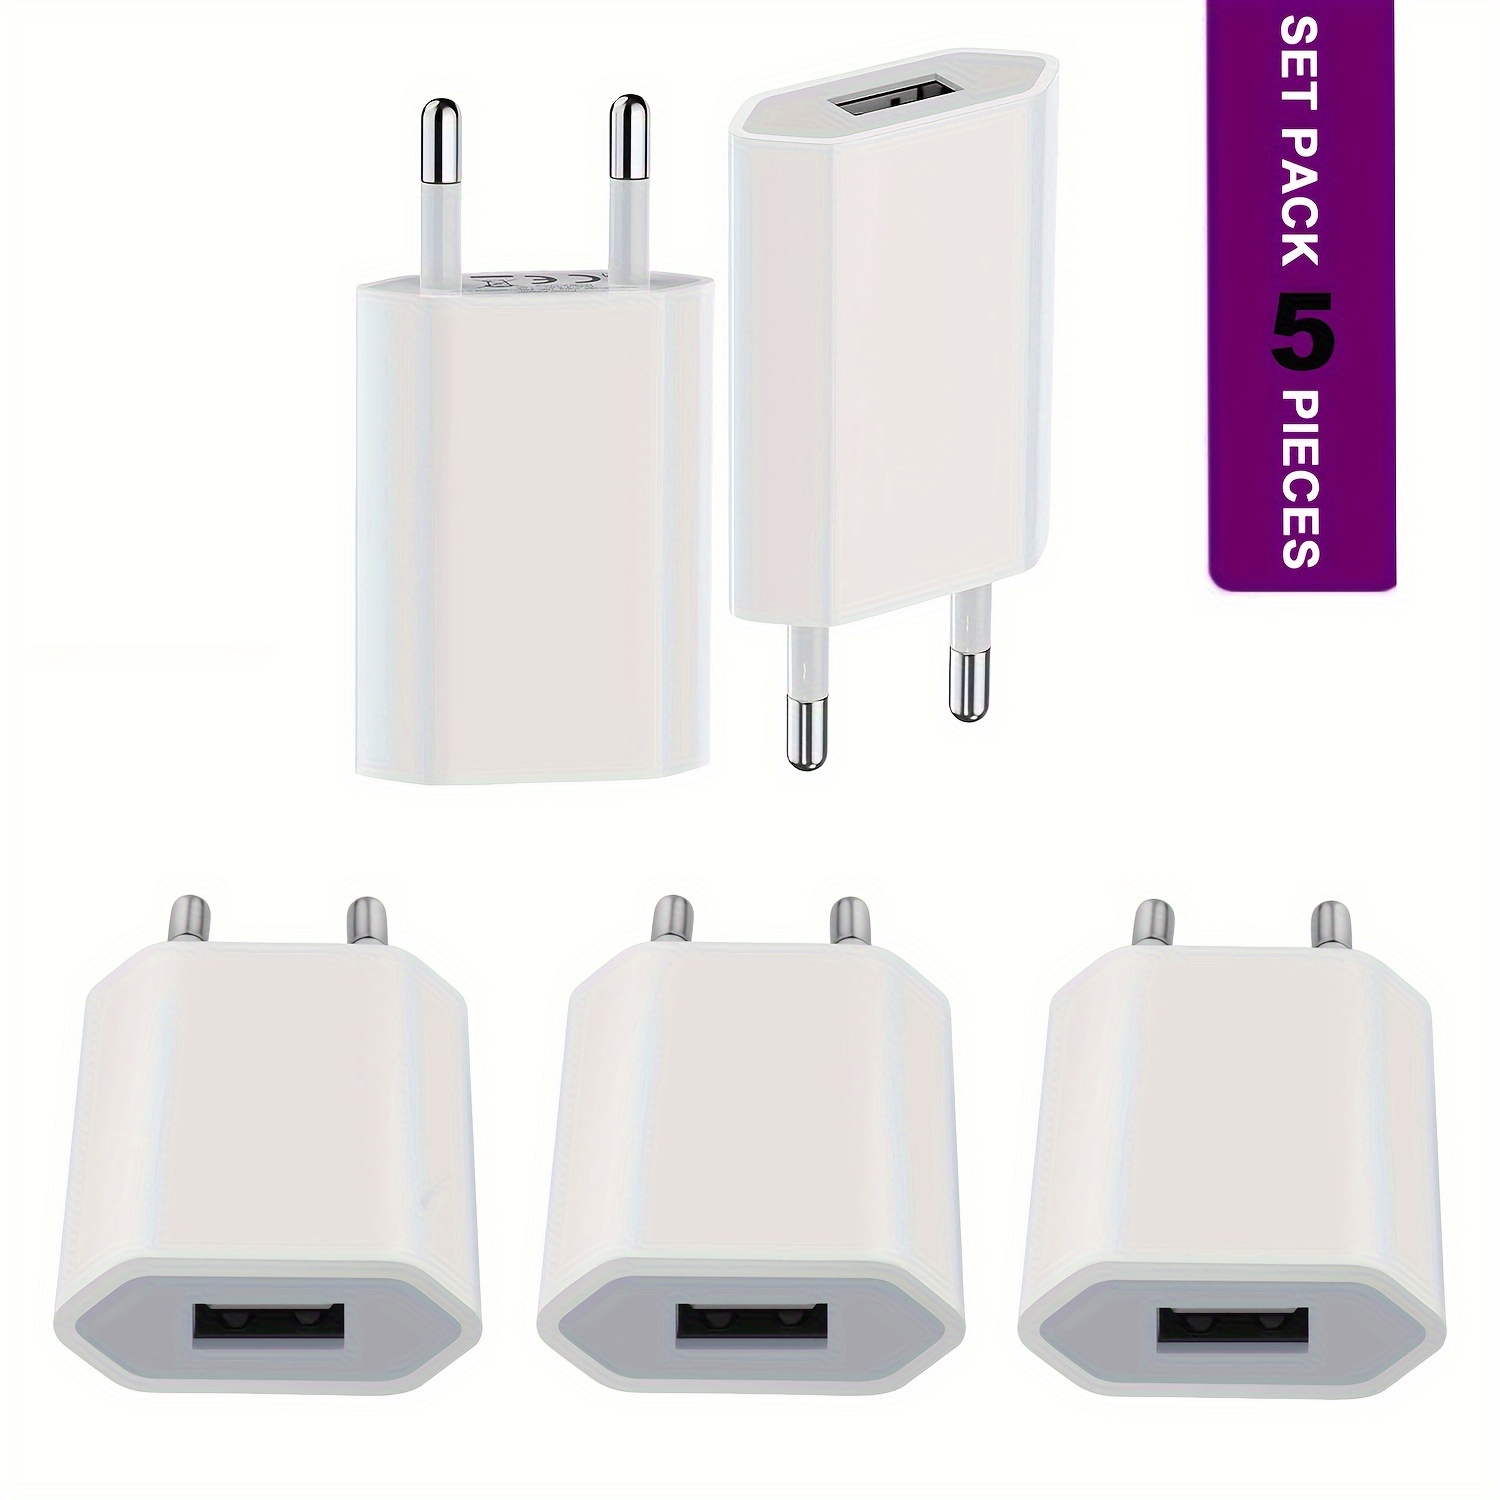 

10-pack 5v1a Usb Wall Charger, European Standard Plug, Travel Friendly Power Adapter For , Android & Usb Charging Devices, Compact & Portable 110v/220v Power Supply Without Battery